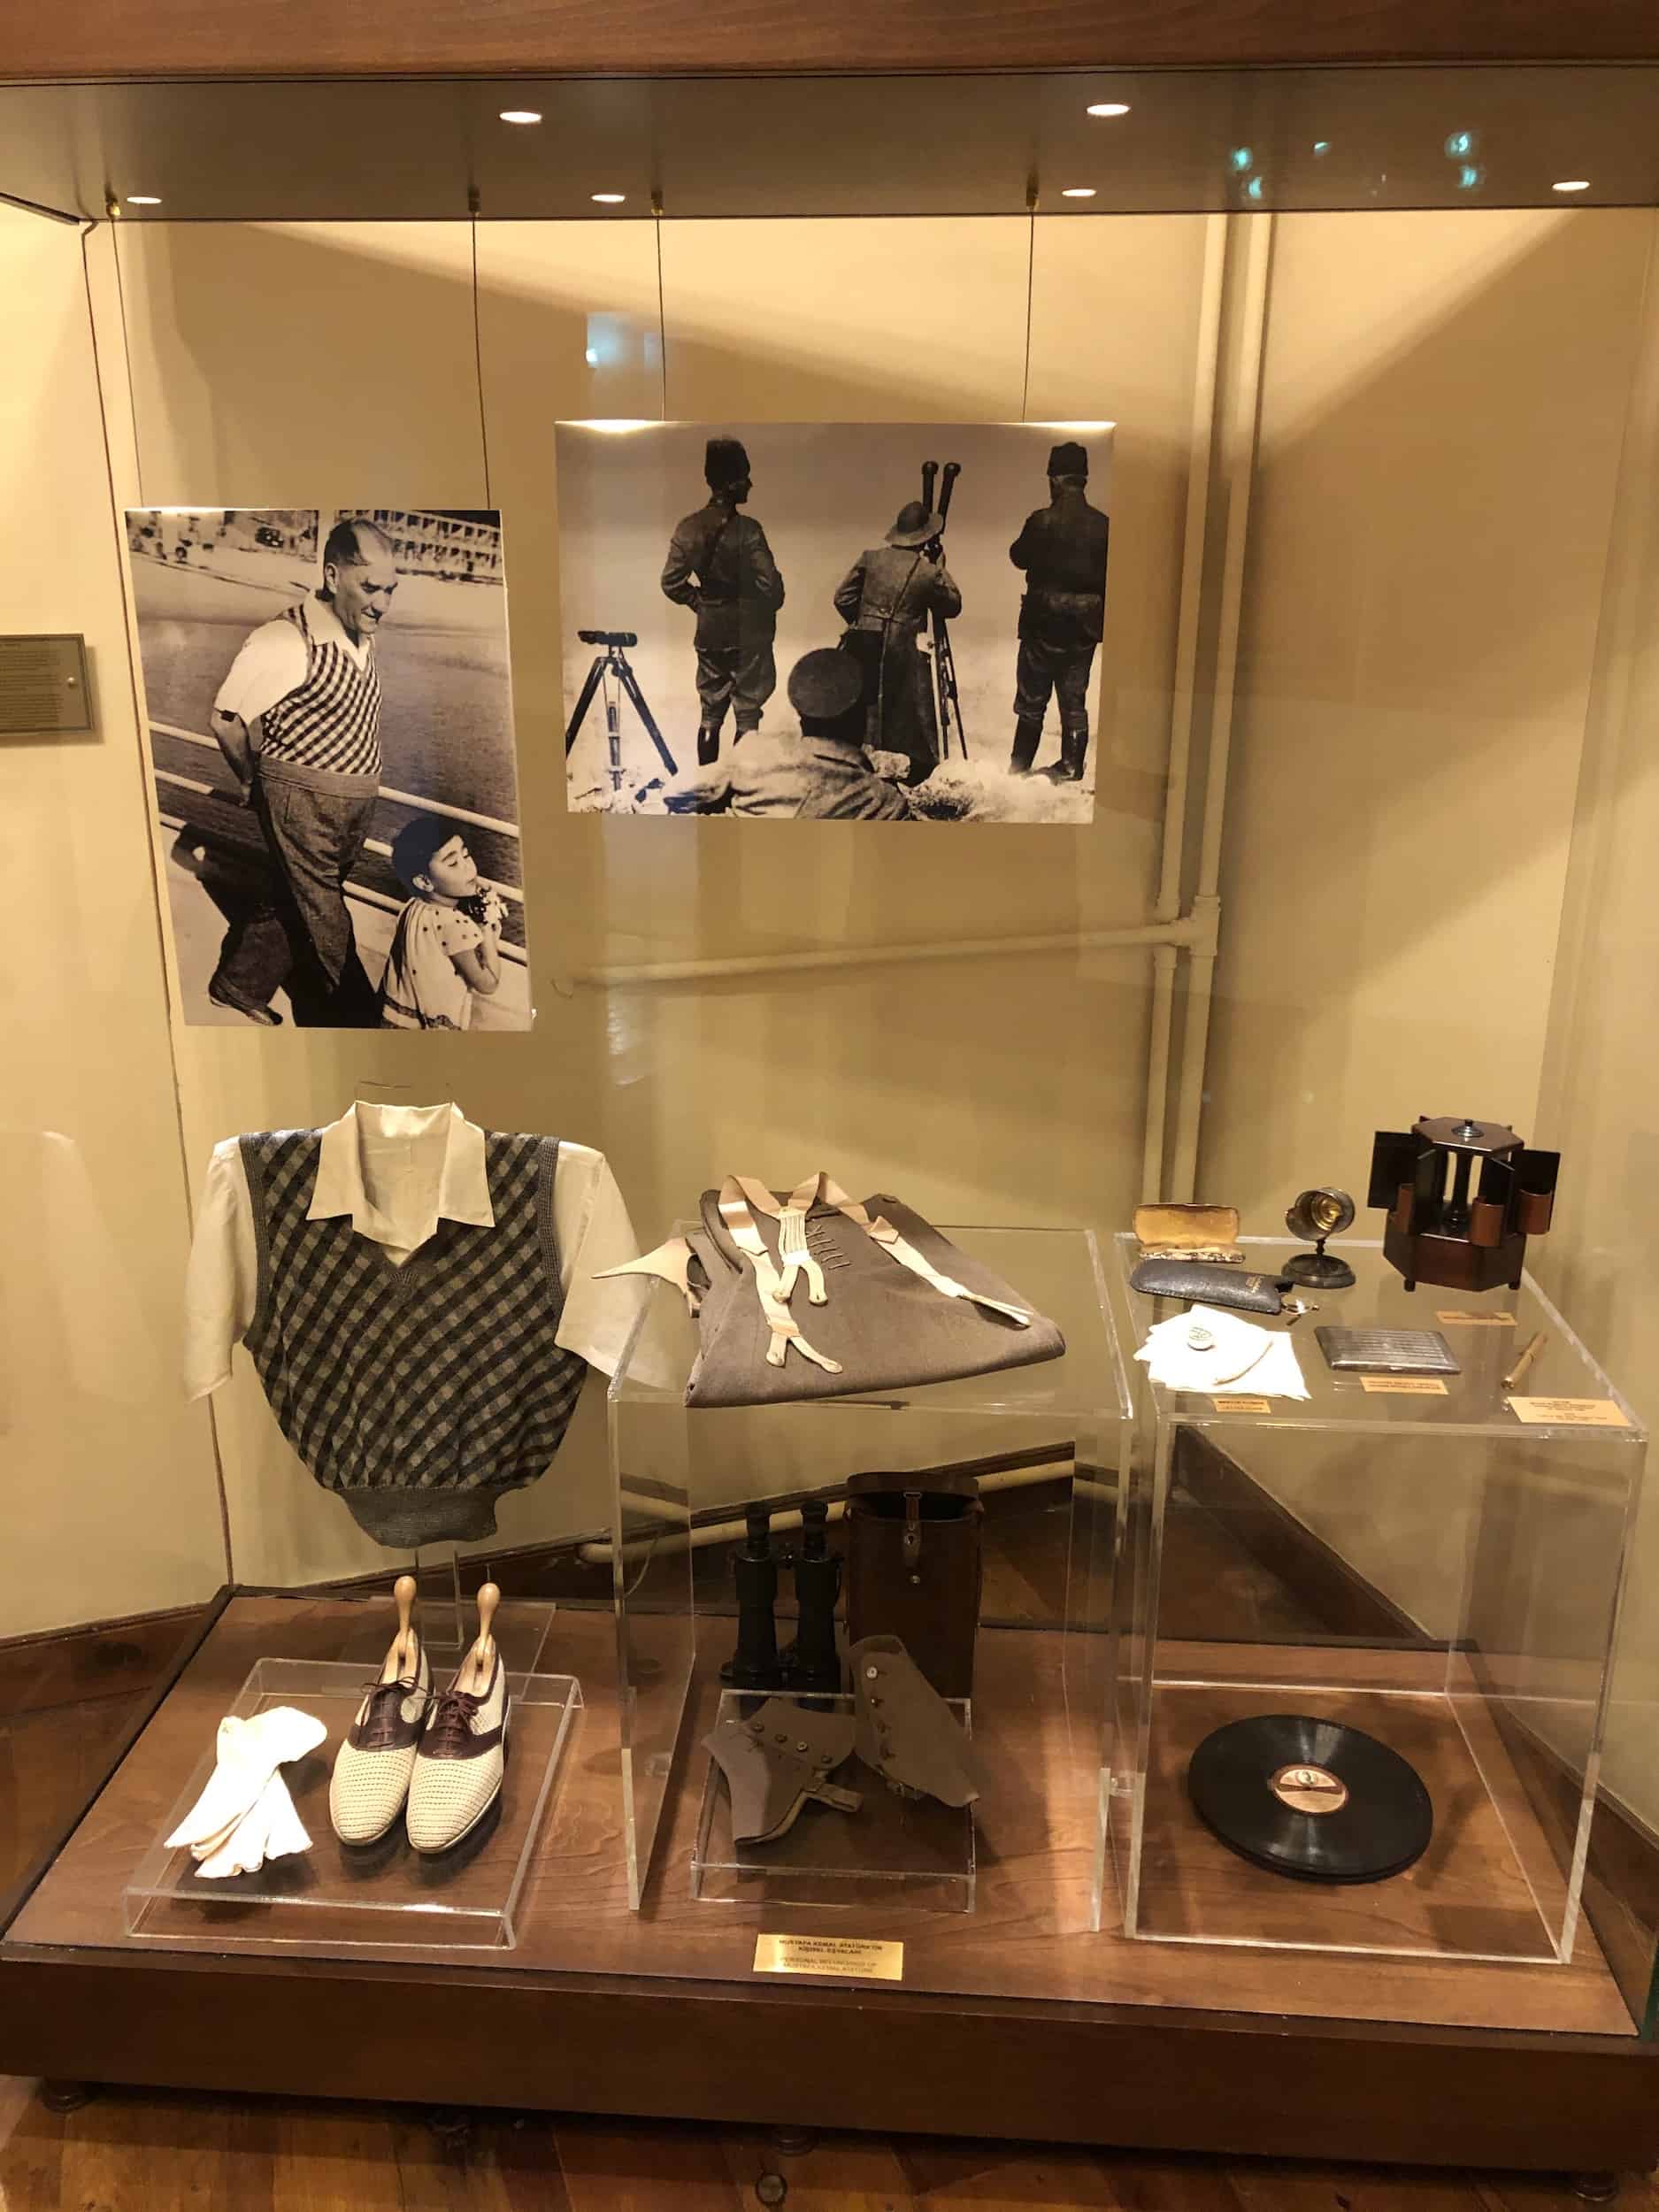 Leisure wear and personal items used by Atatürk